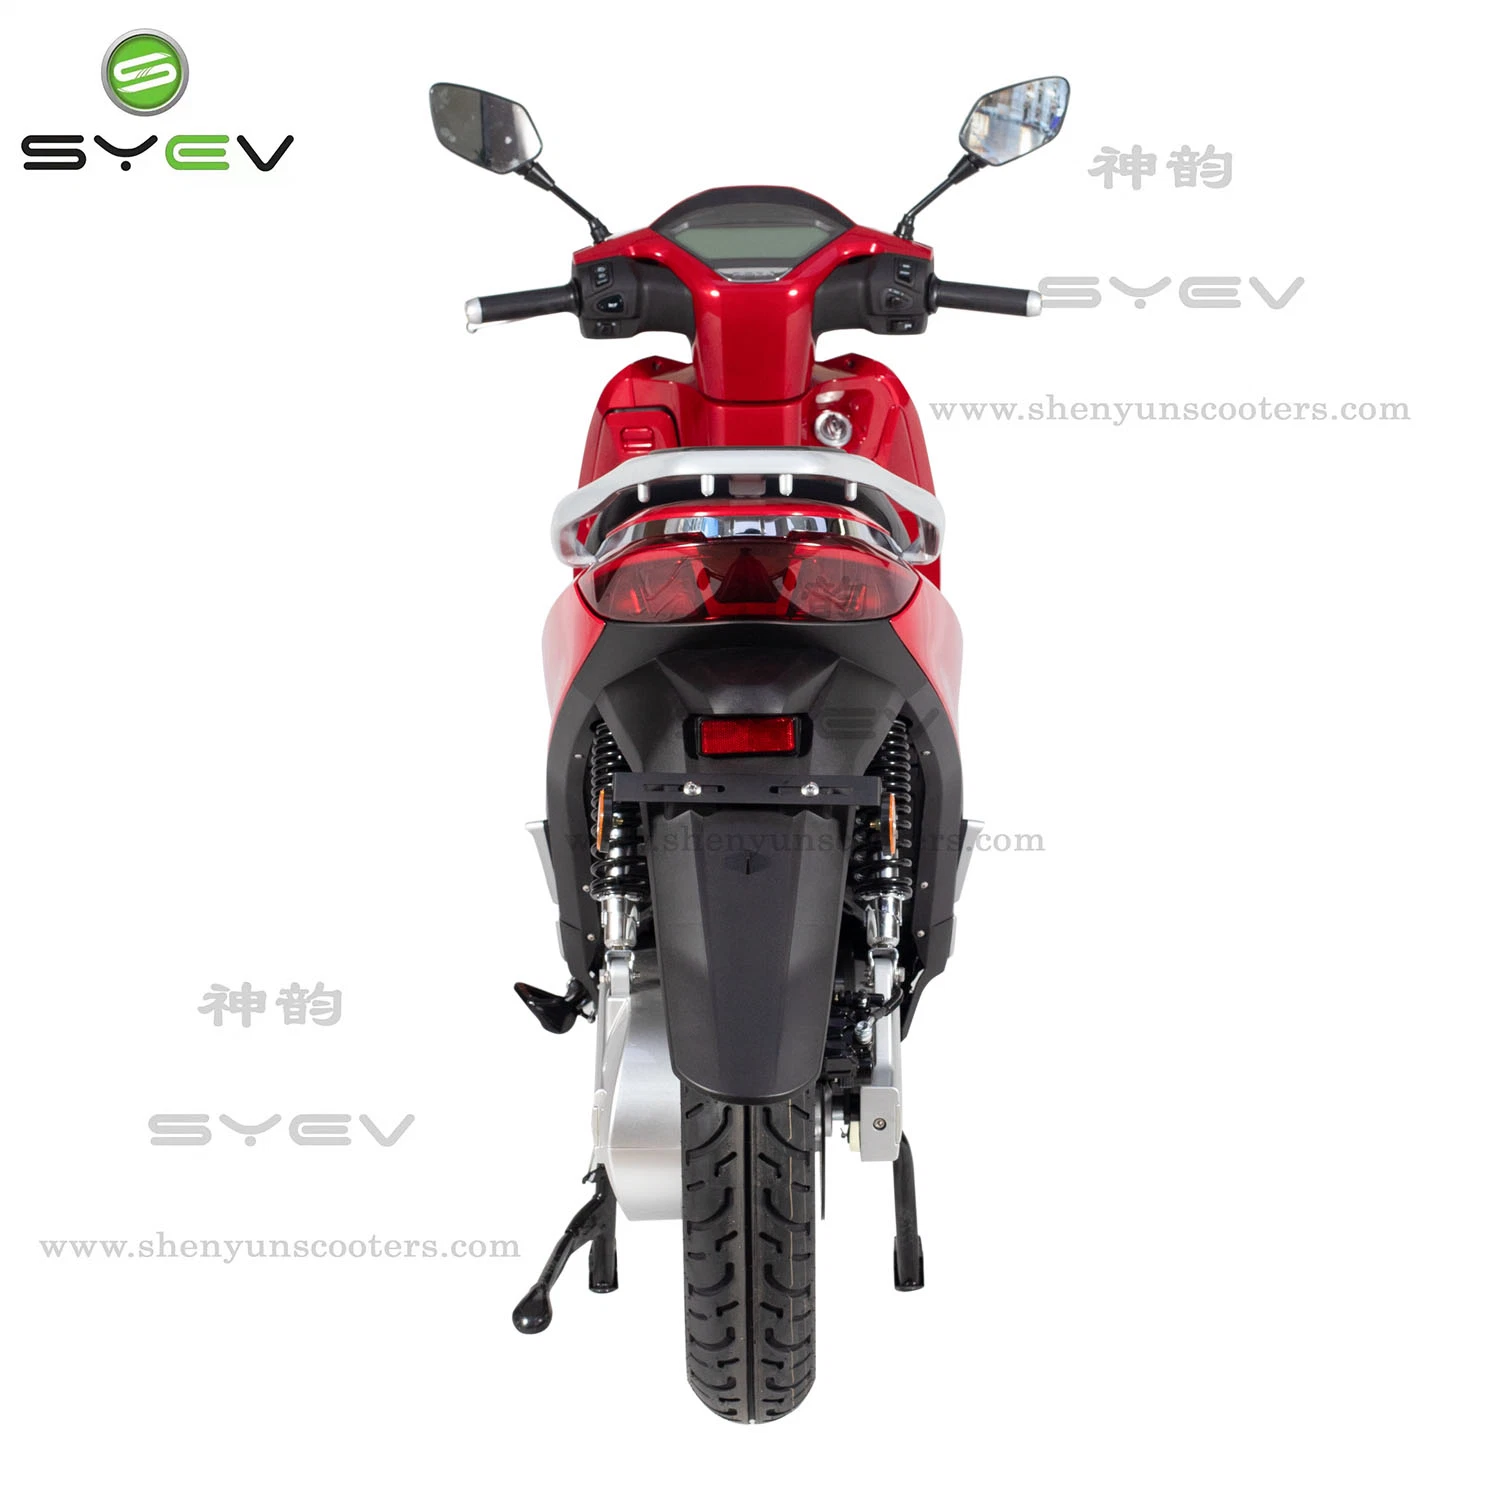 Syev 72V32ah Lead-Acid Battery Can Range of 150km Electric Motorcycle